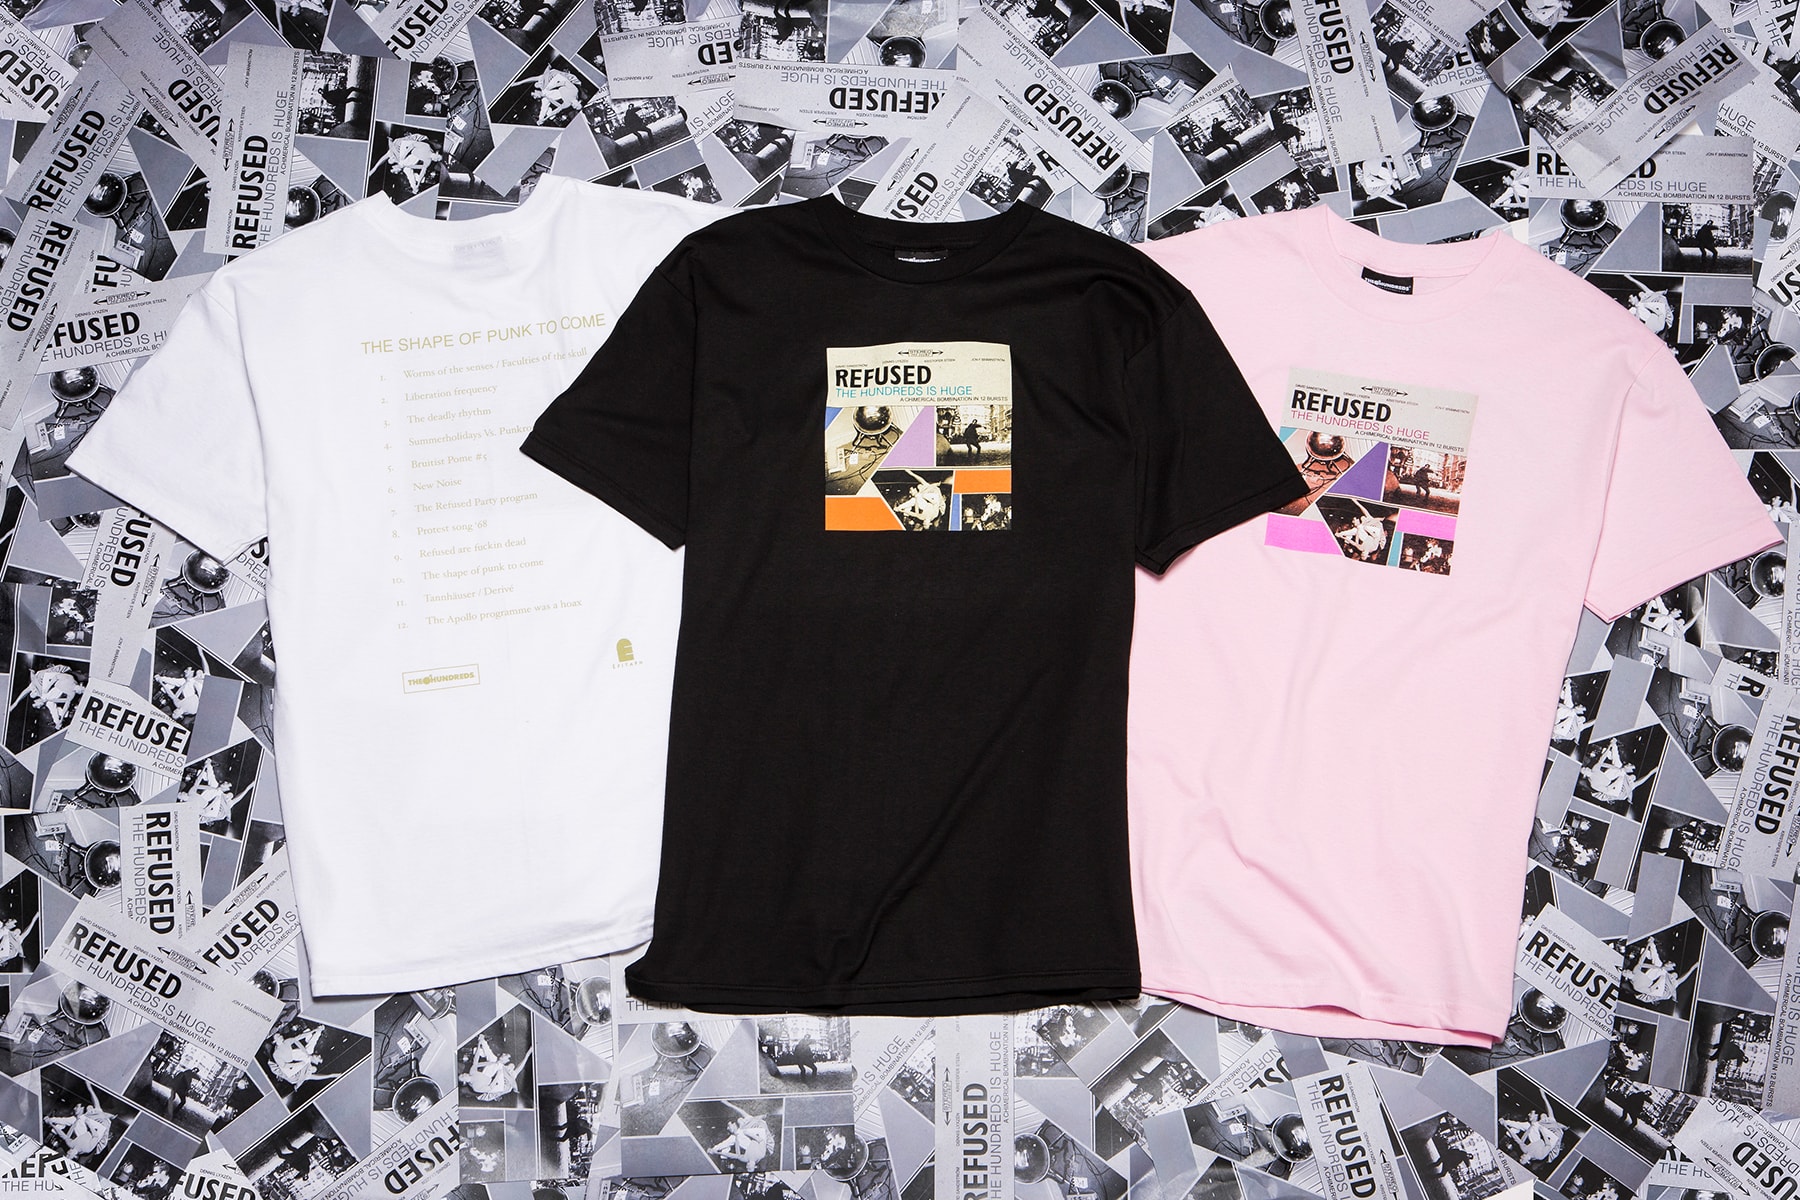 The Hundreds x Epitaph Records Collection 2016 tshirts music Bad Religion Recipe for Hate Refused The Shape of Punk to Come Pennywise Unknown Road Descendents Everything Sucks pink white black blue